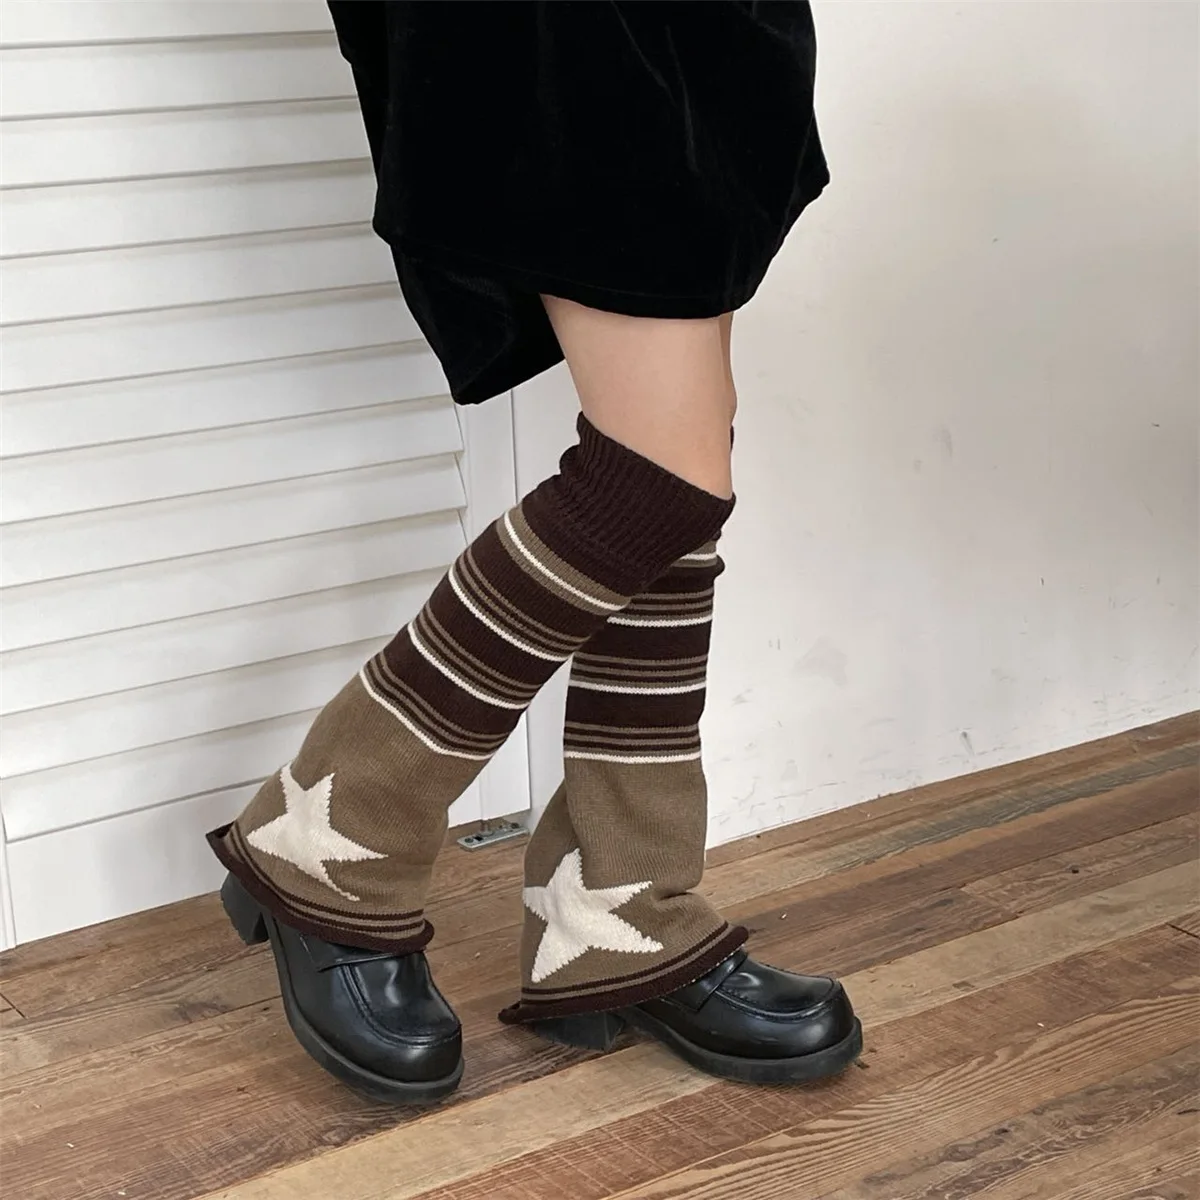 Y2K Brown Star Leg Warmers Stockings Knitted Socks Gothic Cover Stockings Japanese JK Leg Warmers Gothic Hot Girl Accessories